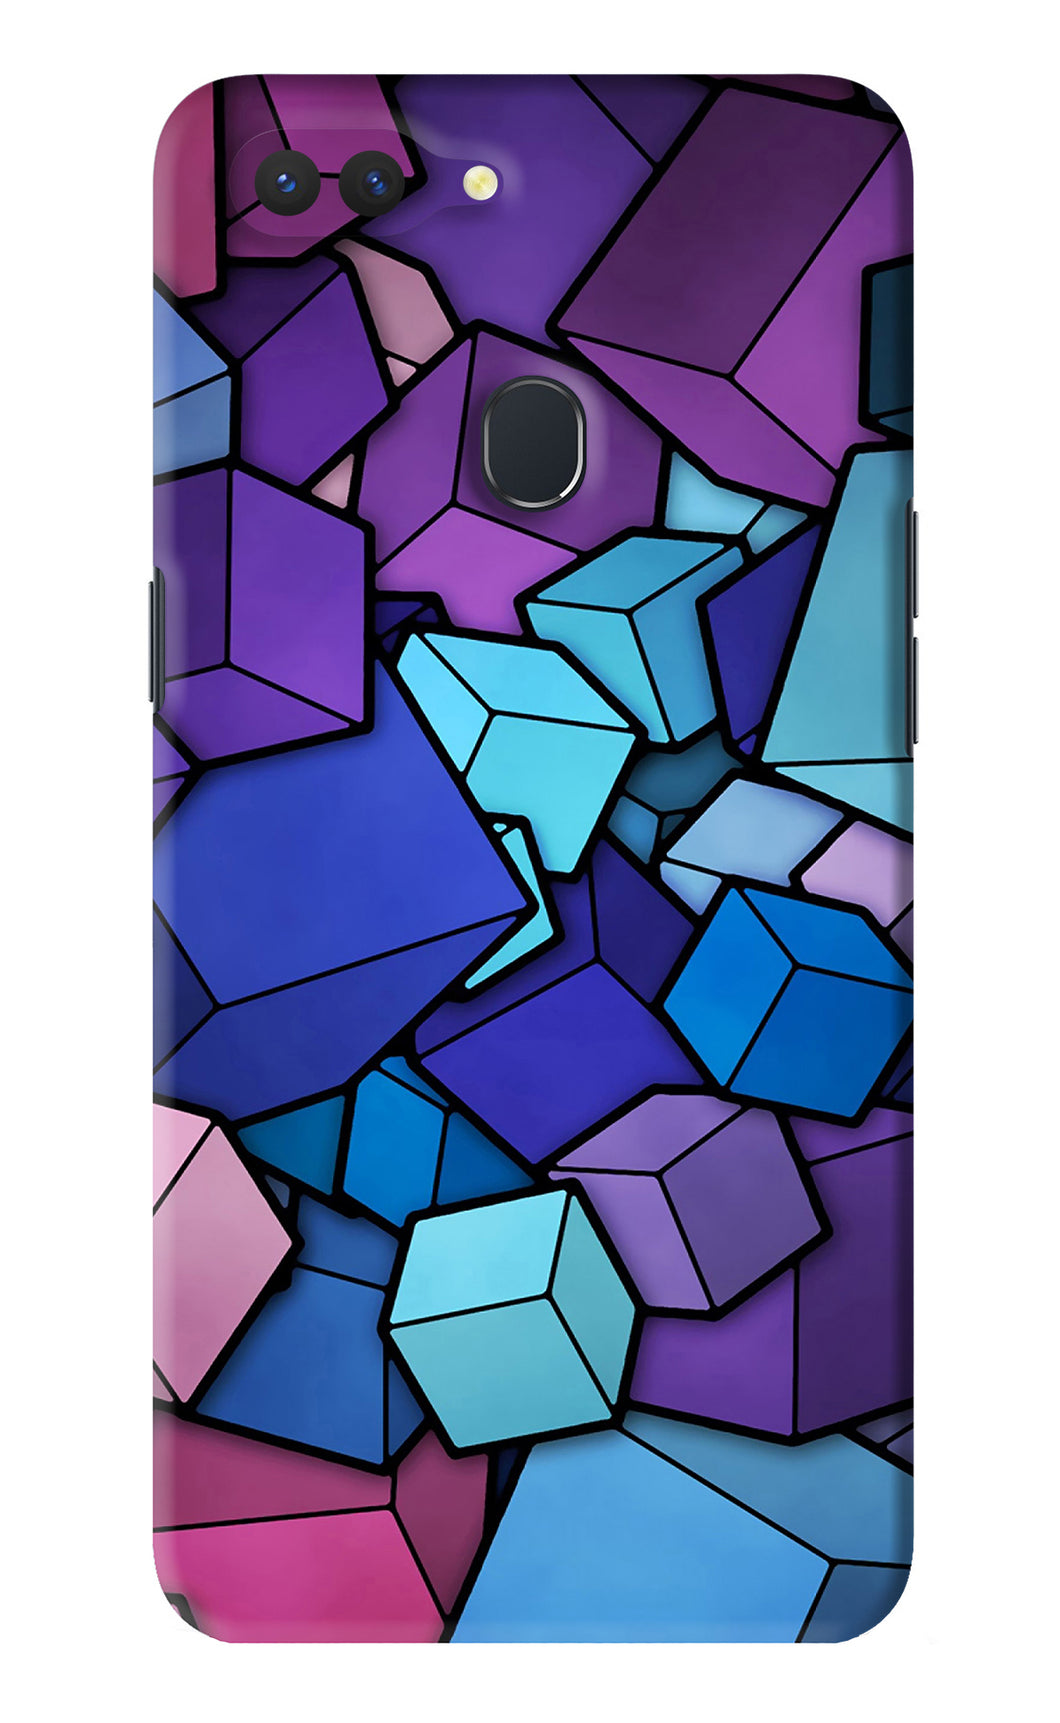 Cubic Abstract Realme 2 Back Skin Wrap